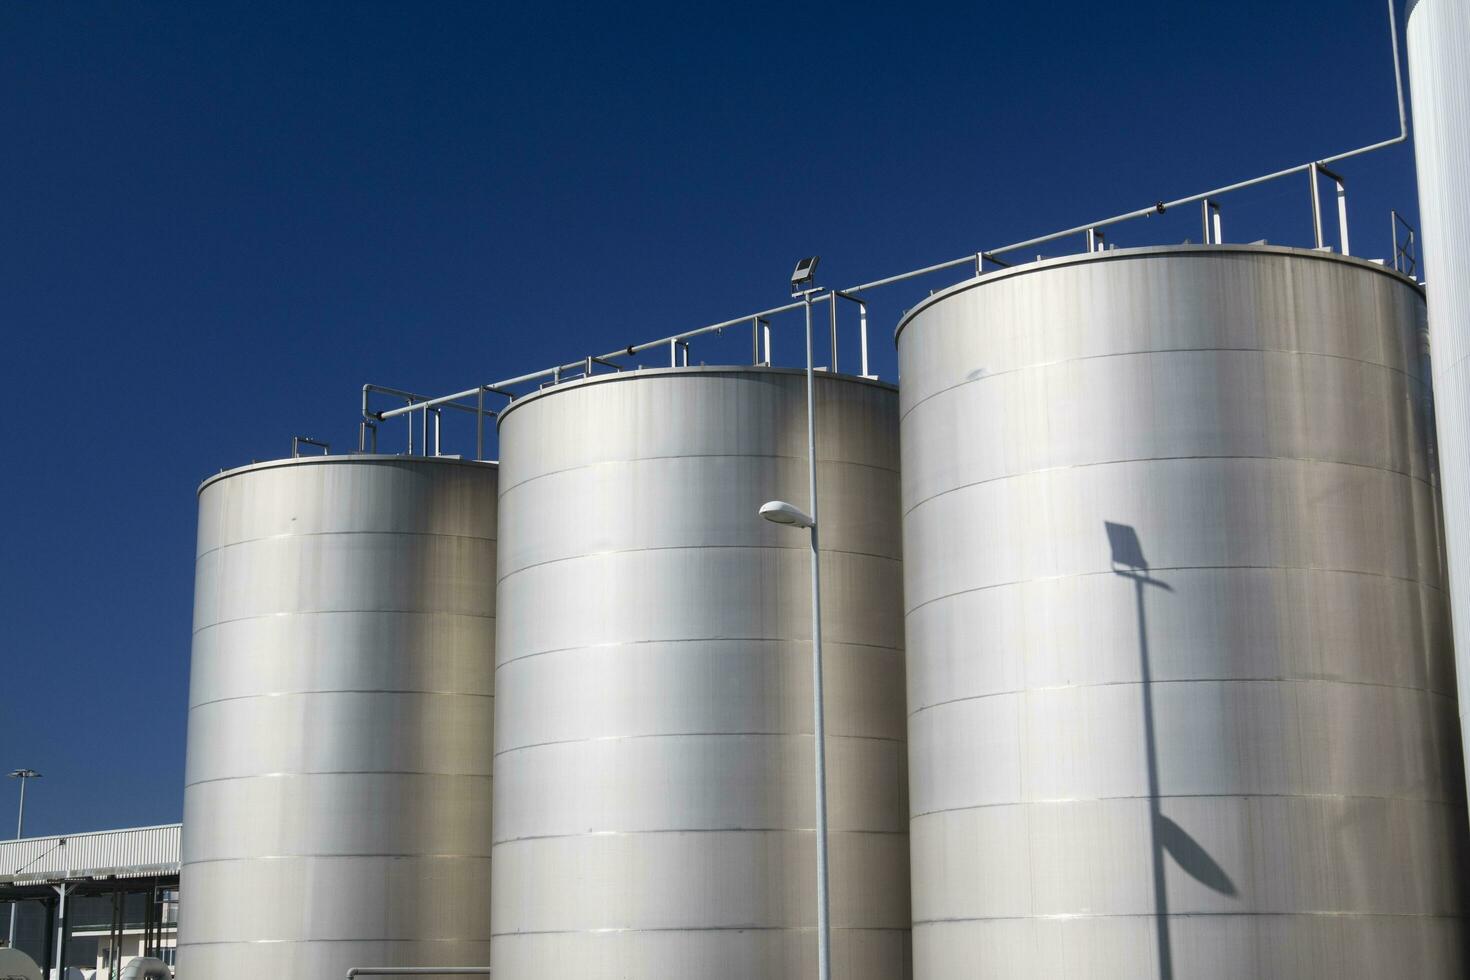 Series of Industrial Silos photo